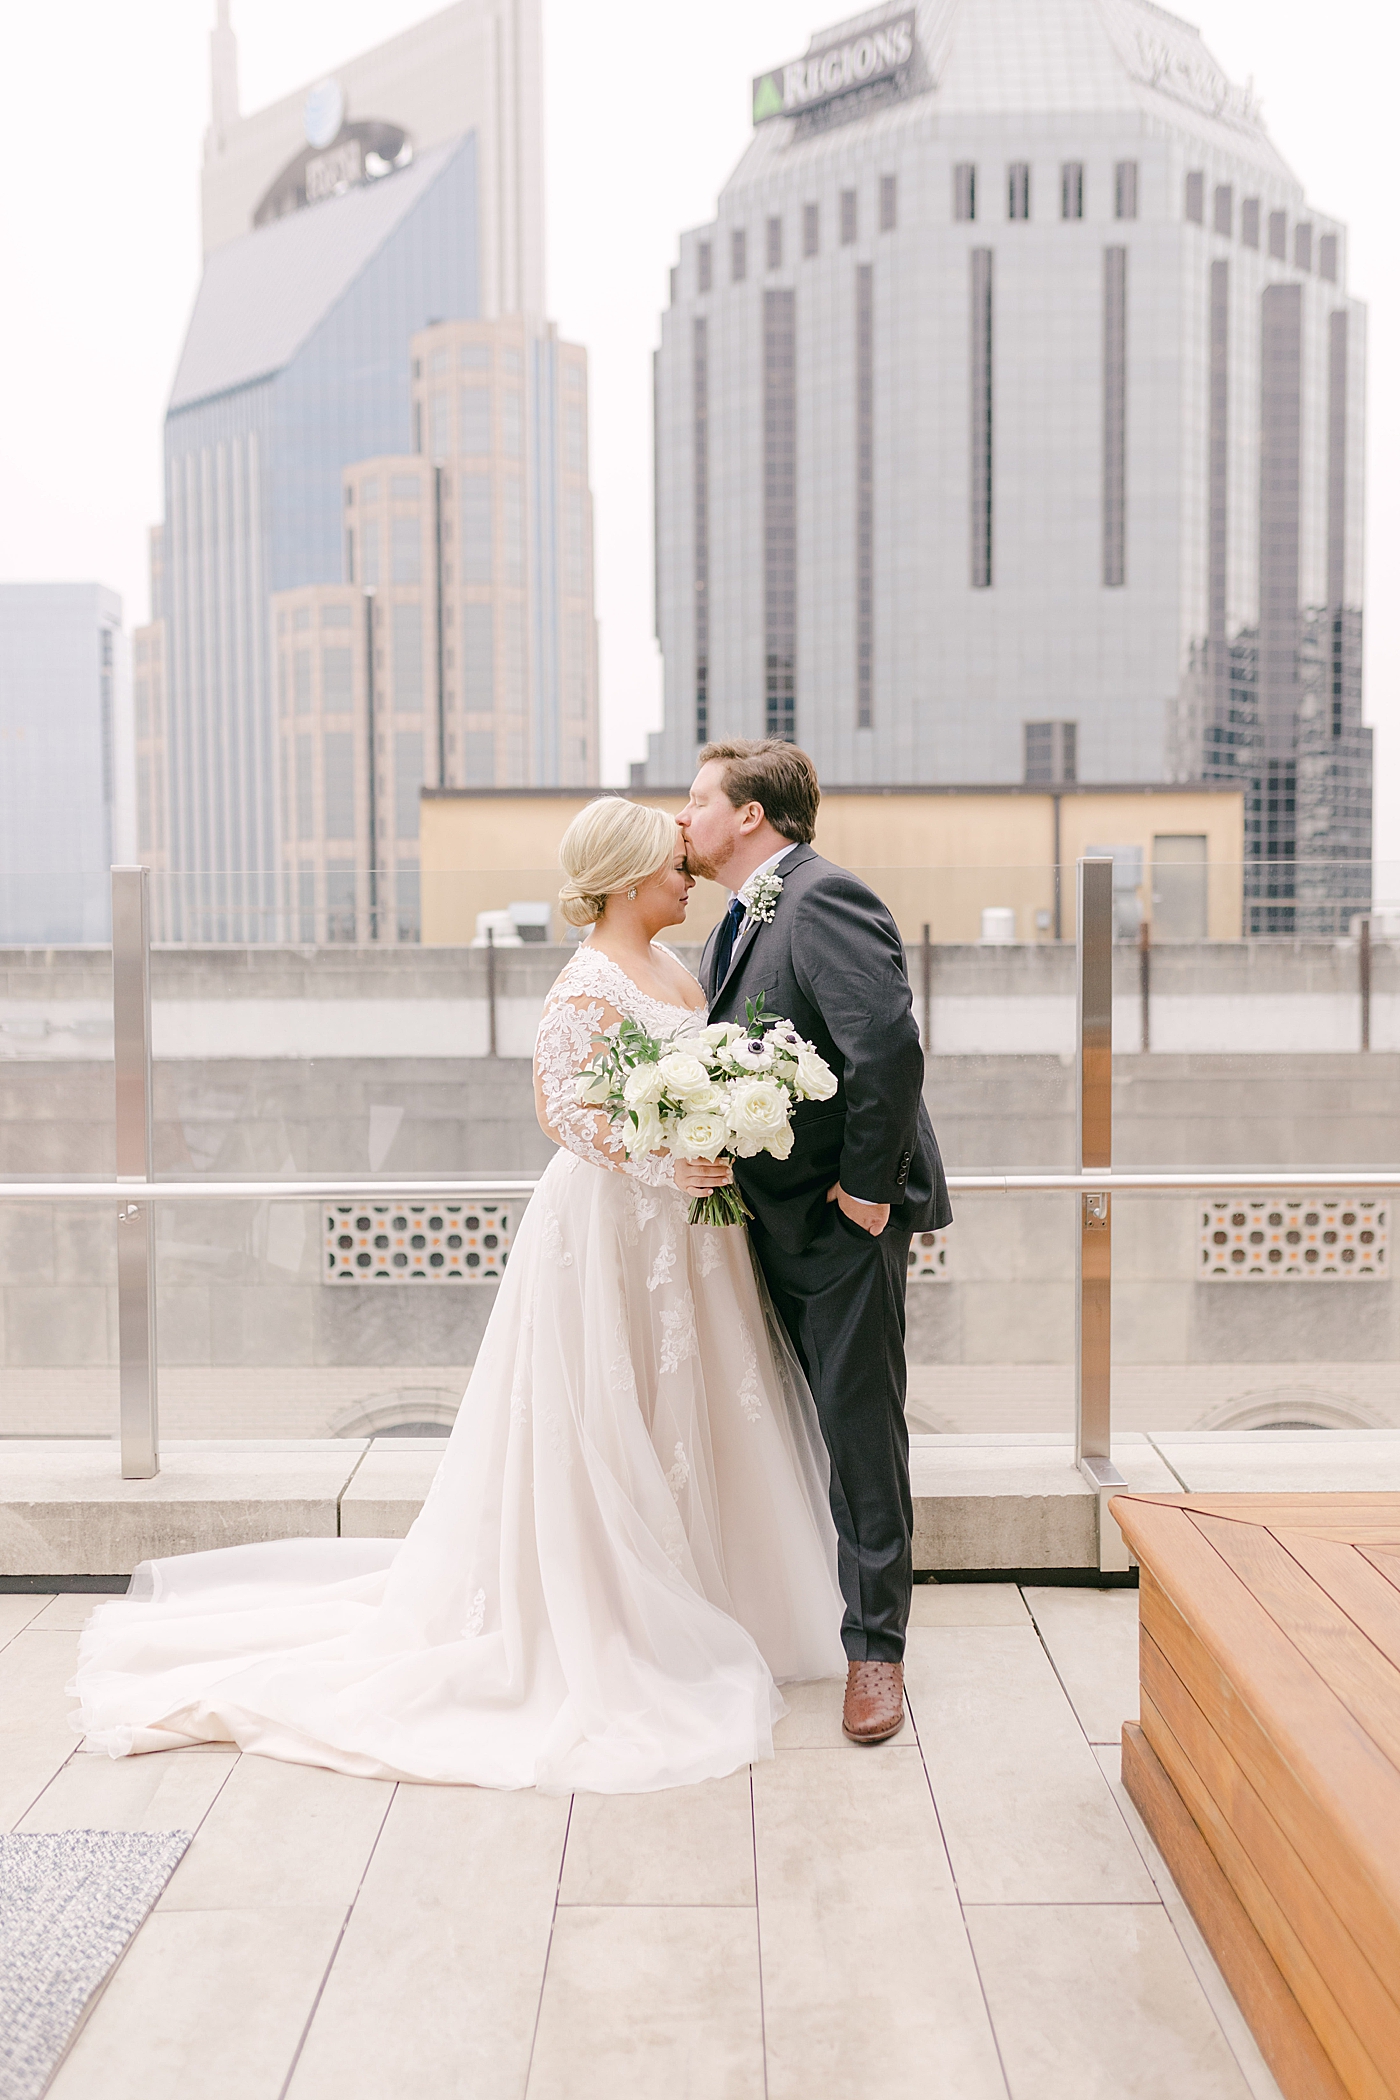 Groom kissing bride on forehead on a rooftop in Nashville | Photo by Hope Helmuth Photography